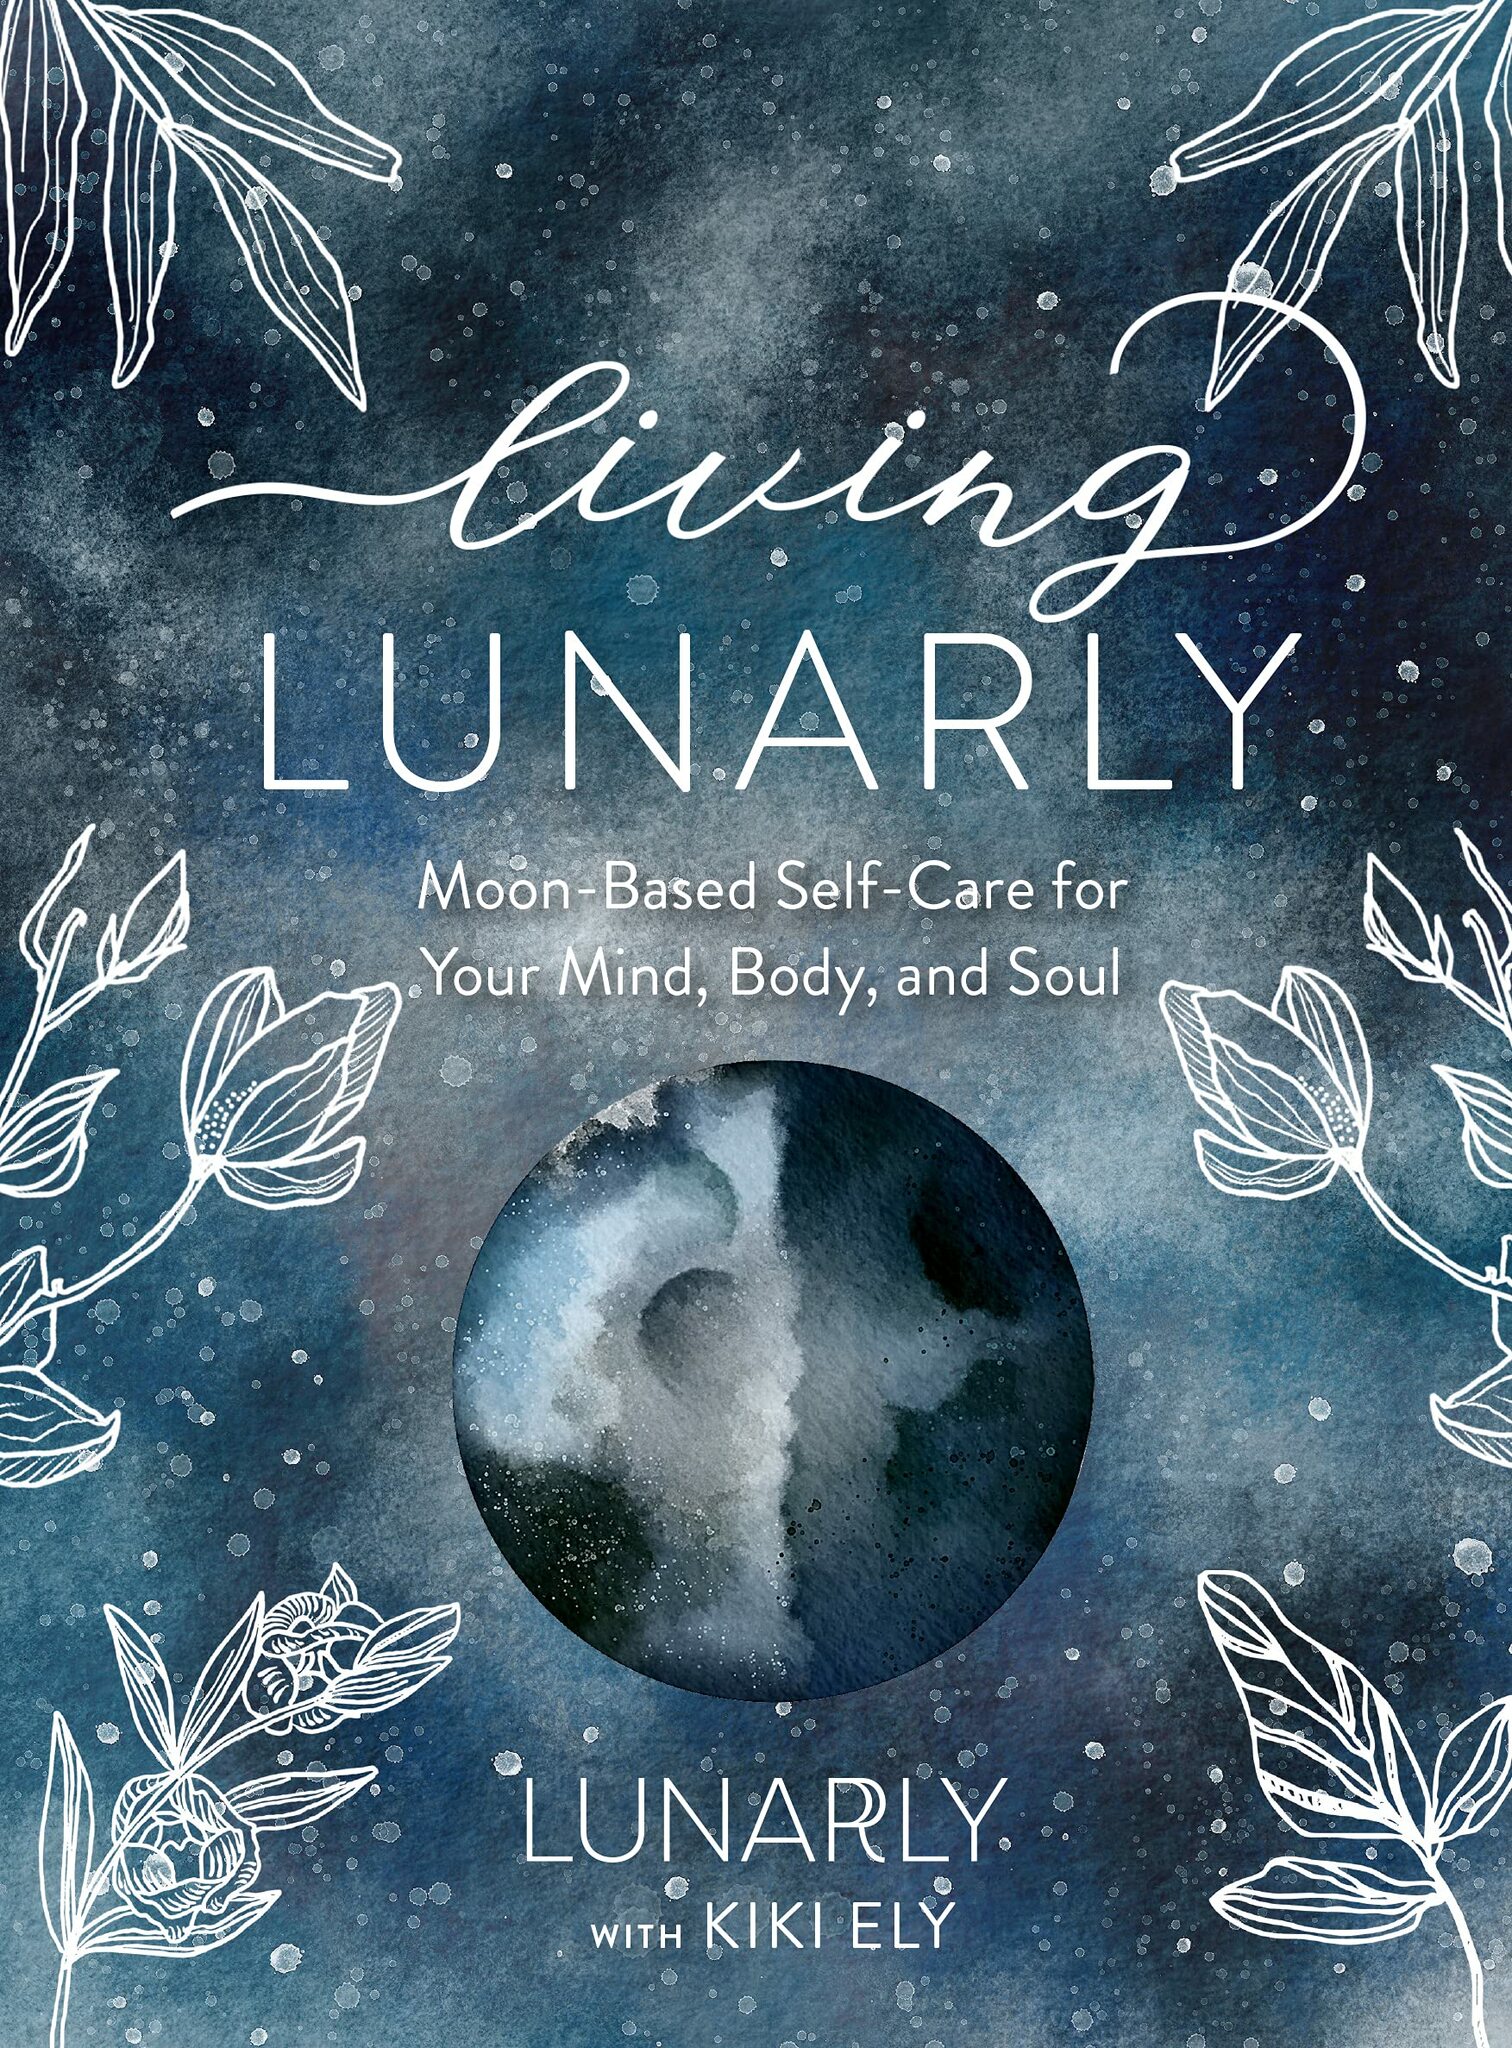 Living Lunarly, moon-based self-care for your mind, body and soul. - Kiki Ely